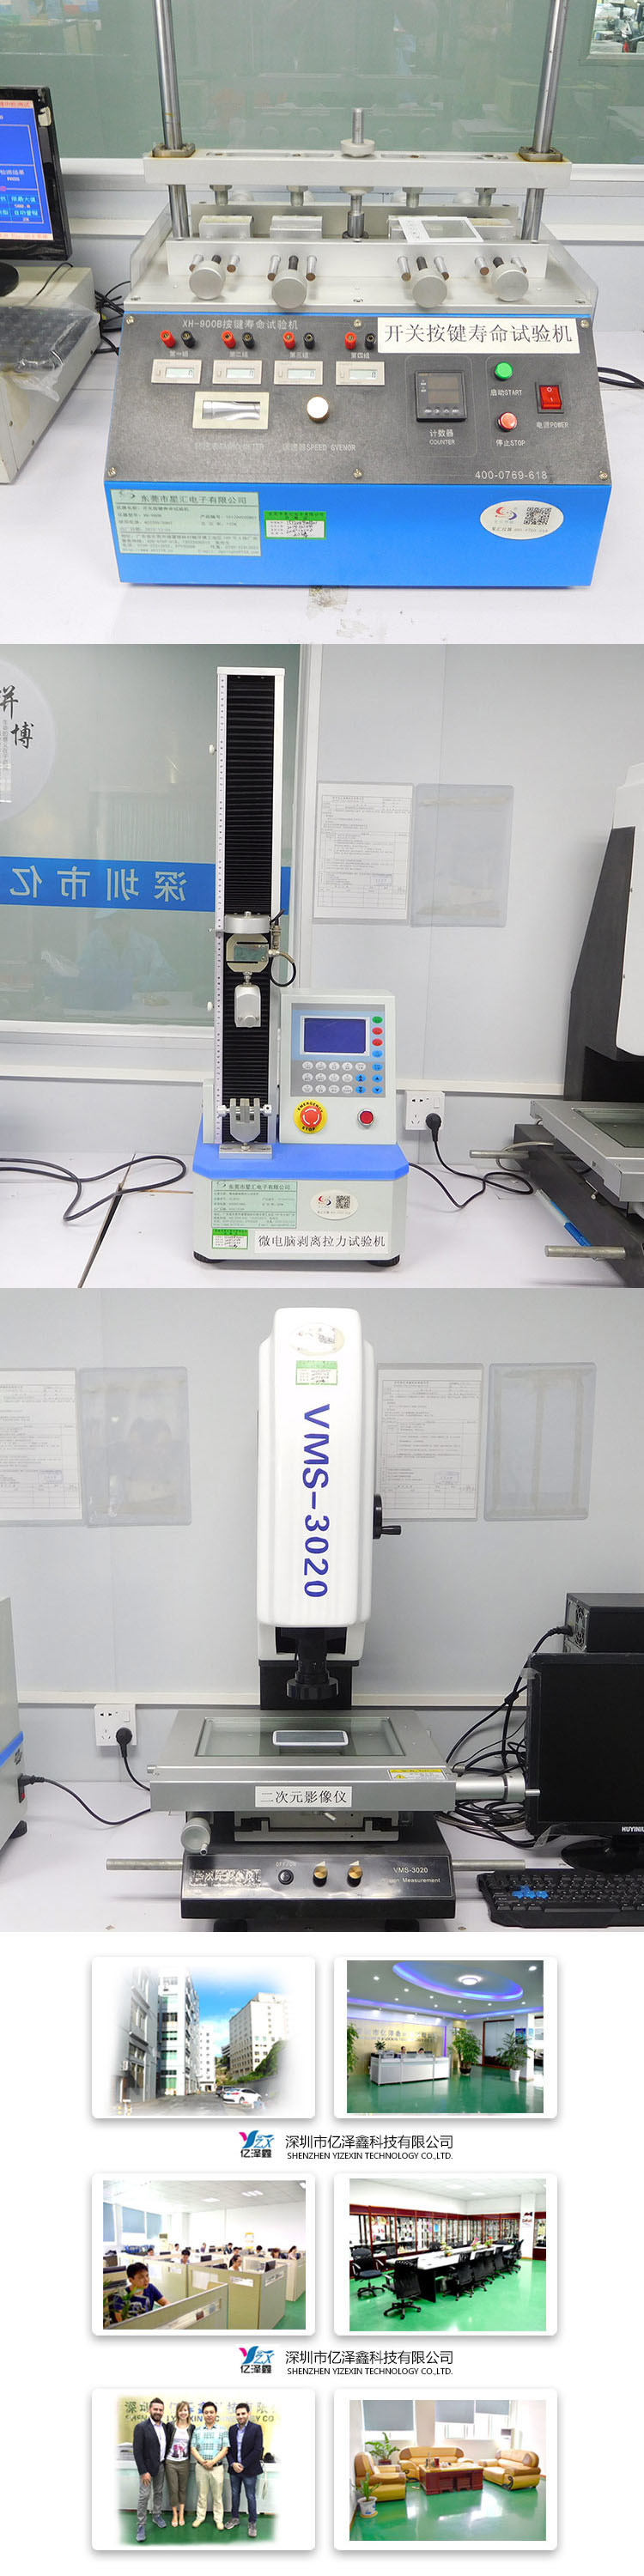 Yizexin Membrane Switch and Membrane Panel for Facilitiy